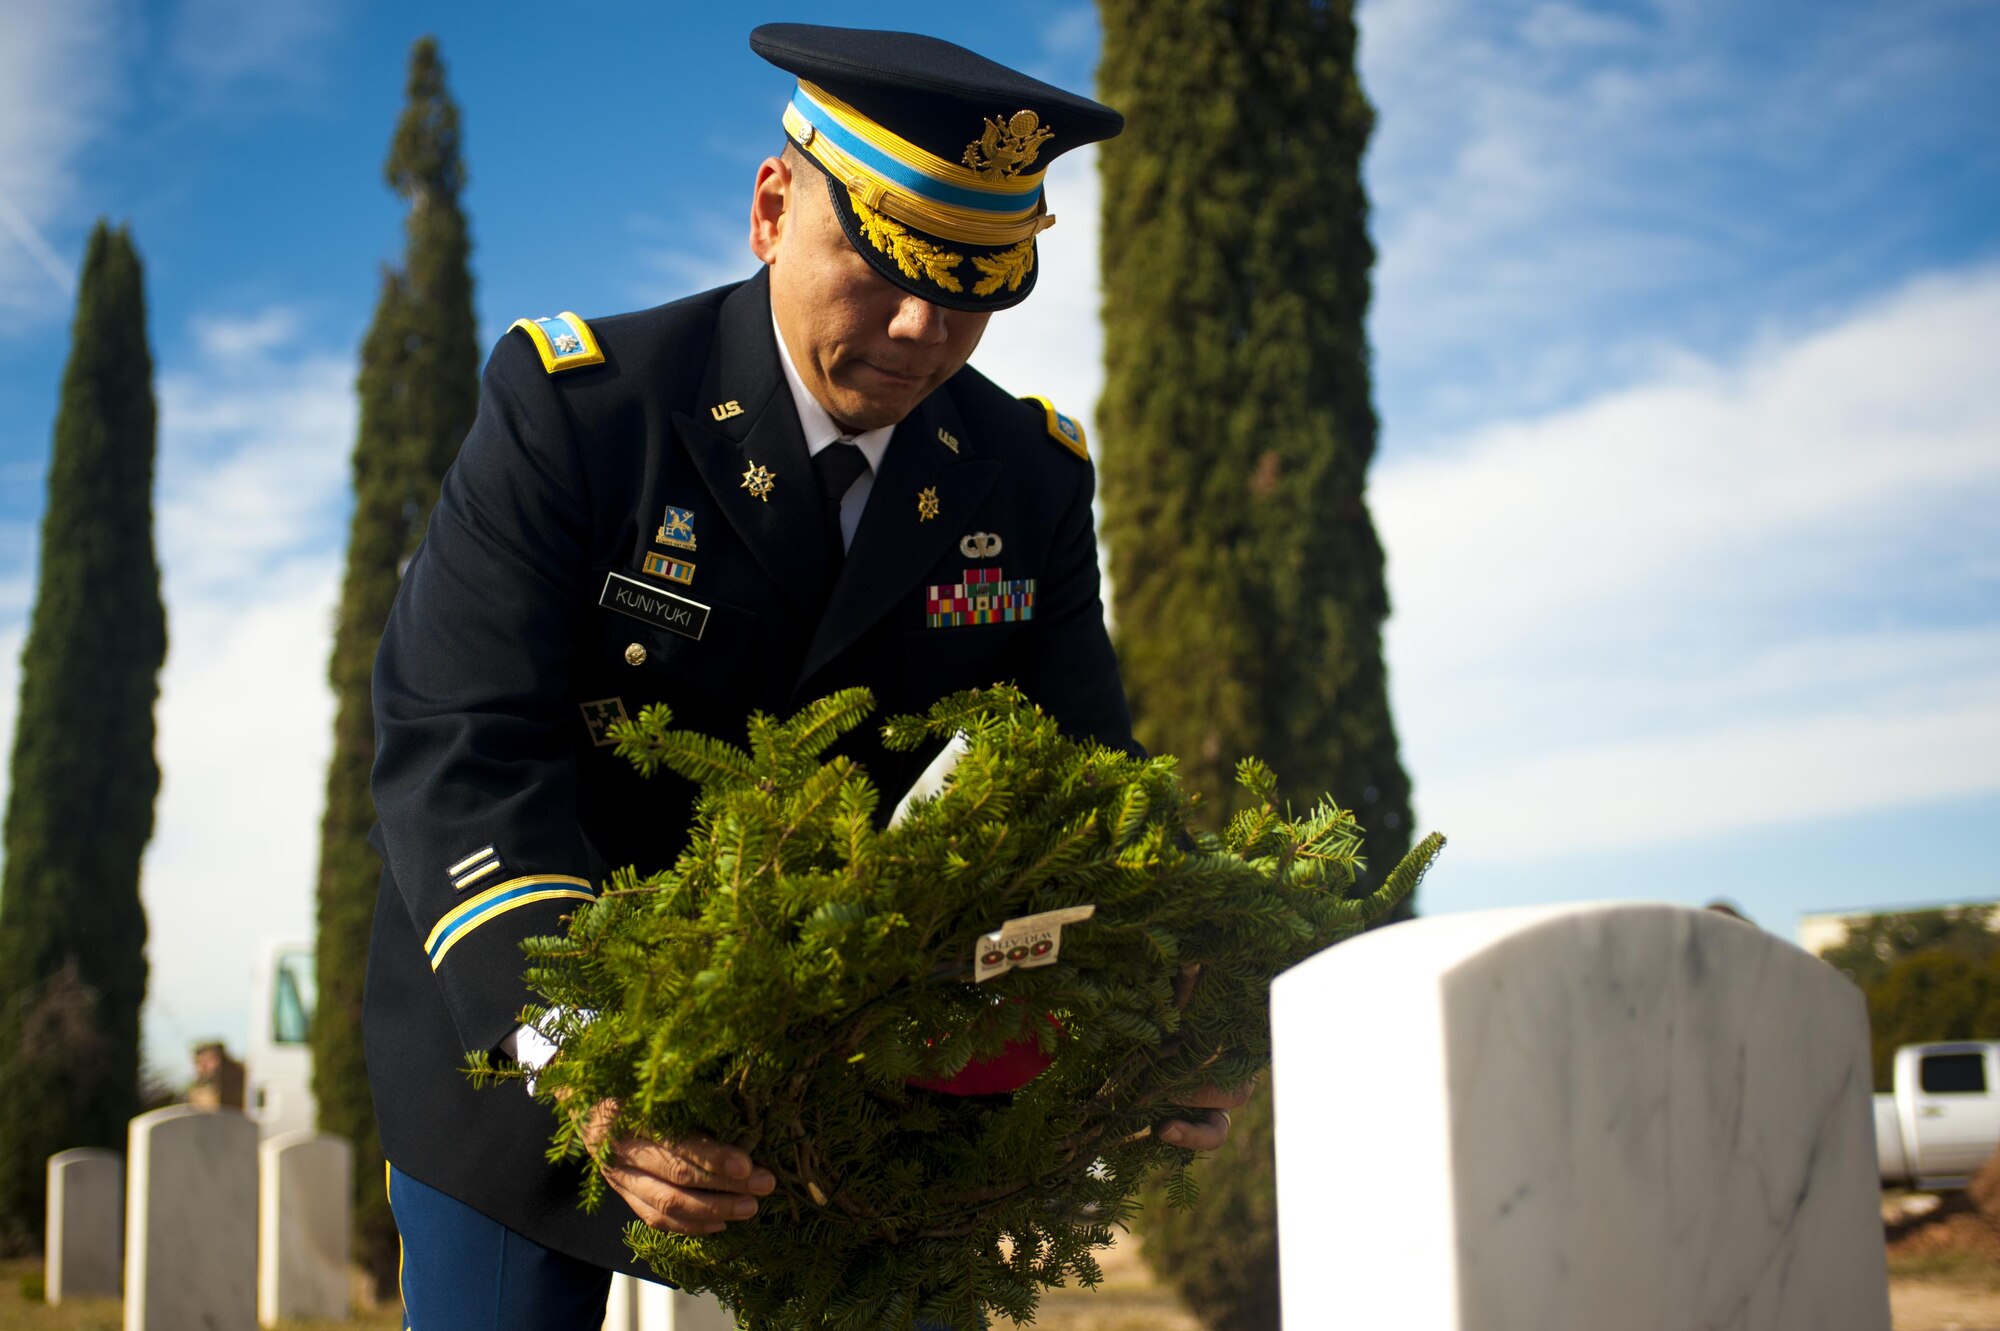 U.S. Army Lt. Col. Yukio Kuniyuki, 344th Military Intelligence Battalion commander, lays a wreath upon a veteran’s grave during a Wreaths Across America ceremony at Belvedere Cemetery, San Angelo, Texas, Dec. 17, 2016. Wreaths Across America’s mission is remember, honor, teach; remember the fallen, honor those who serve and teach our children the value of freedom. (U.S. Air Force photo by Senior Airman Scott Jackson/released)